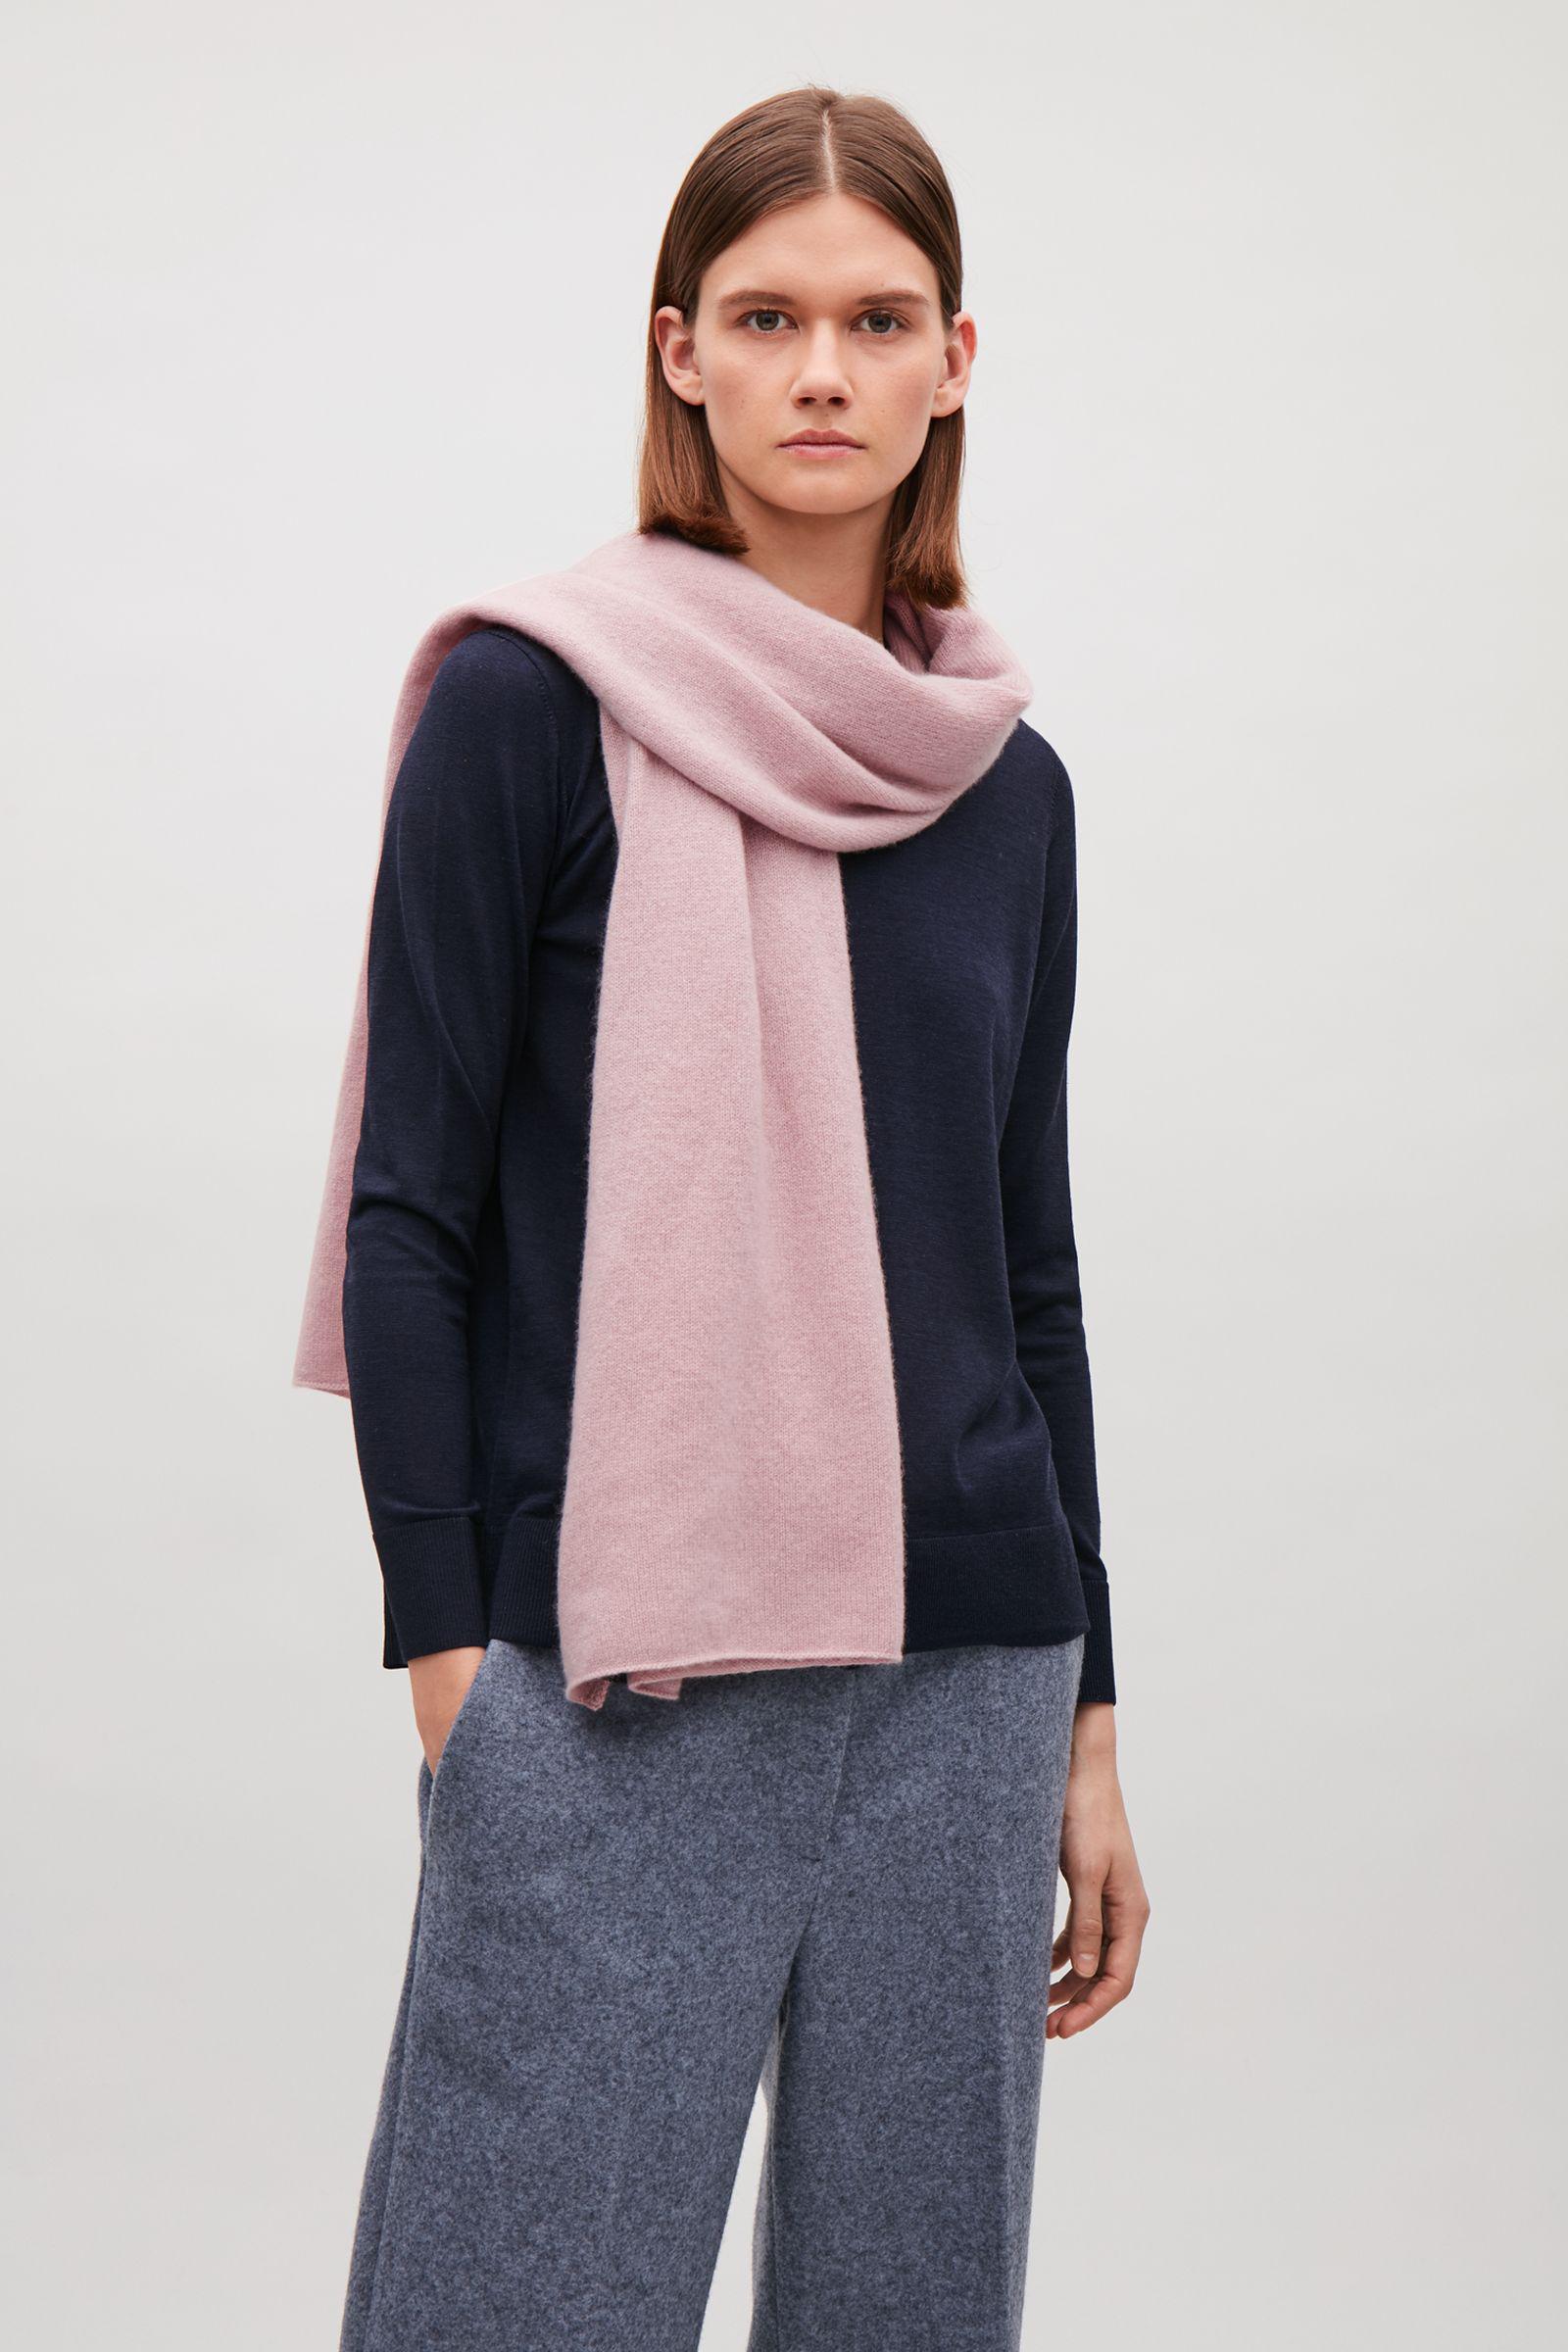 COS Cashmere Scarf in Powder Pink (Pink) - Lyst